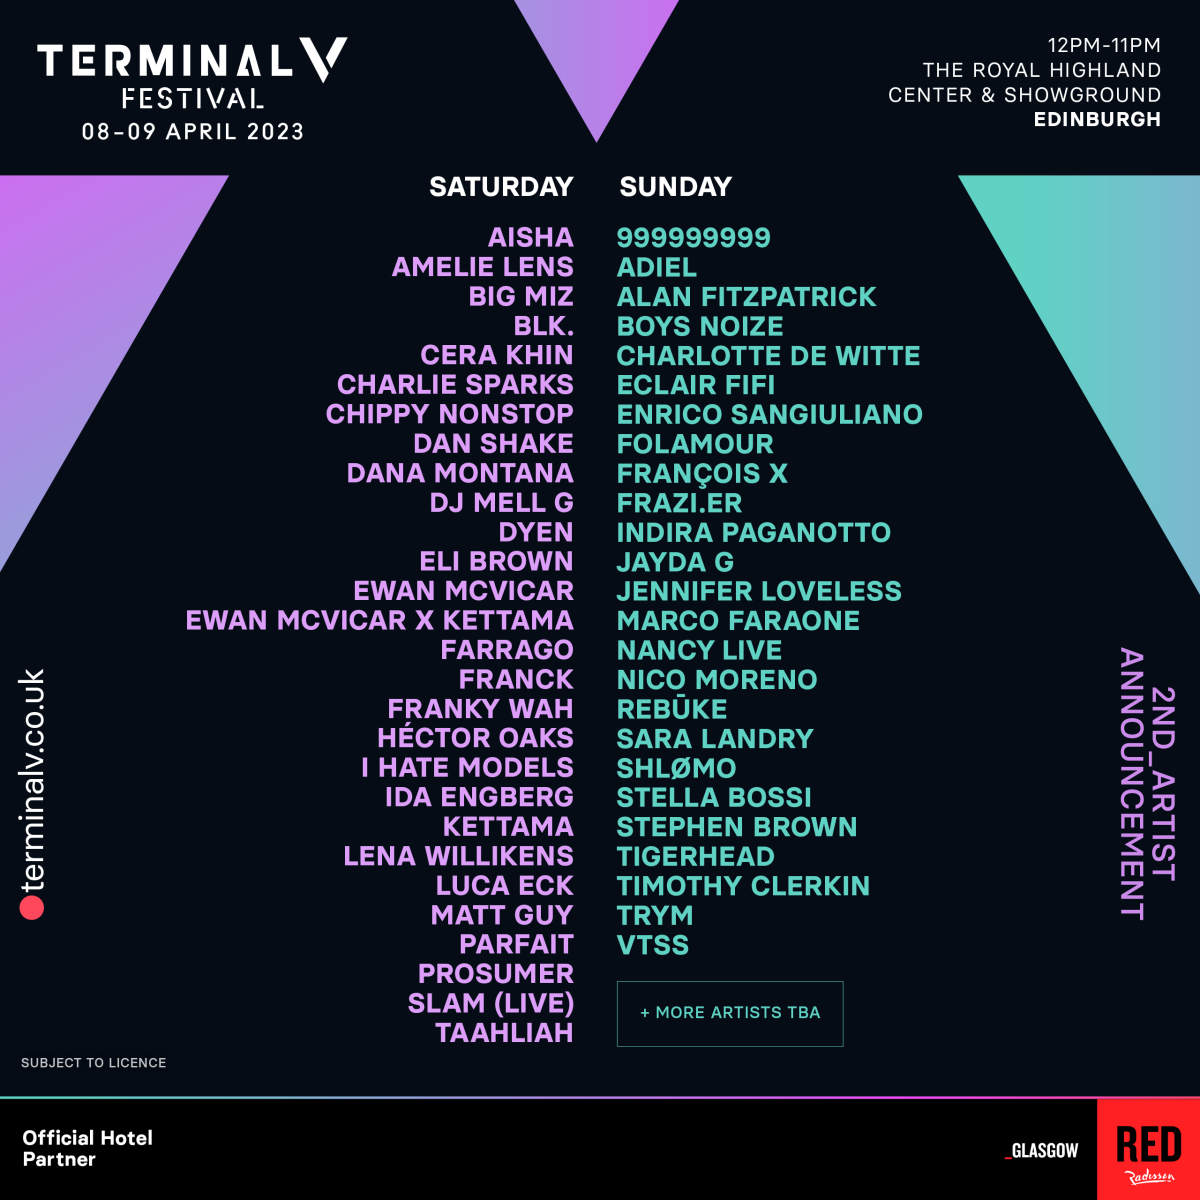 The lineup for Terminal V 2023 features Charlotte de Witte, Amelie Lens, Boys Noize, I Hate Models, Franky Wah and more.